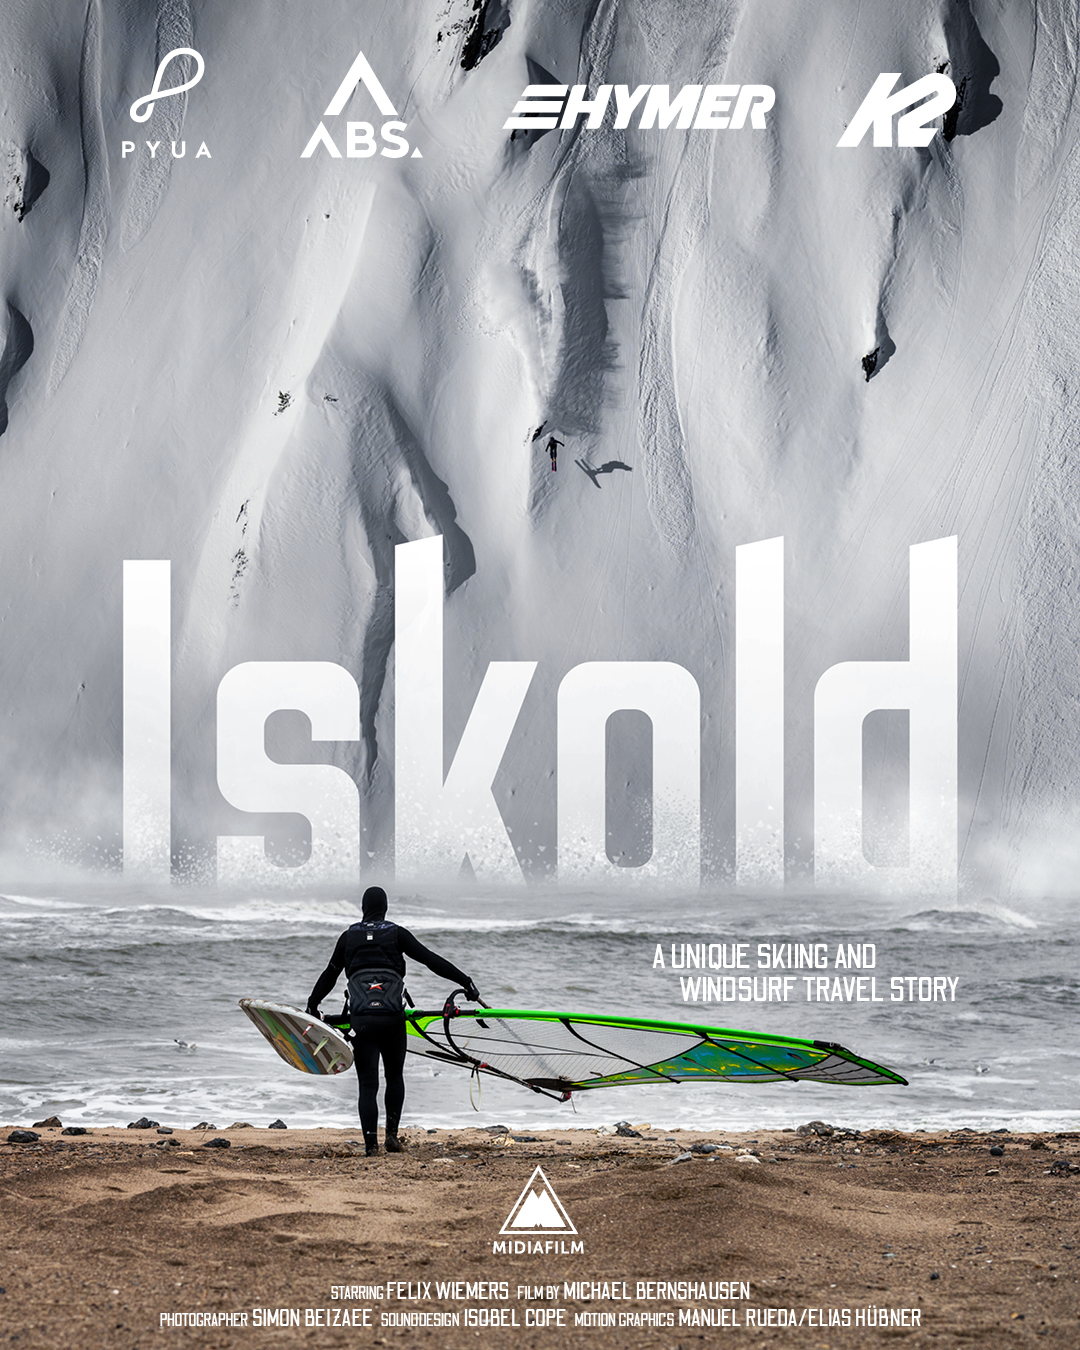 Iskold /A unique skiing and windsurf story